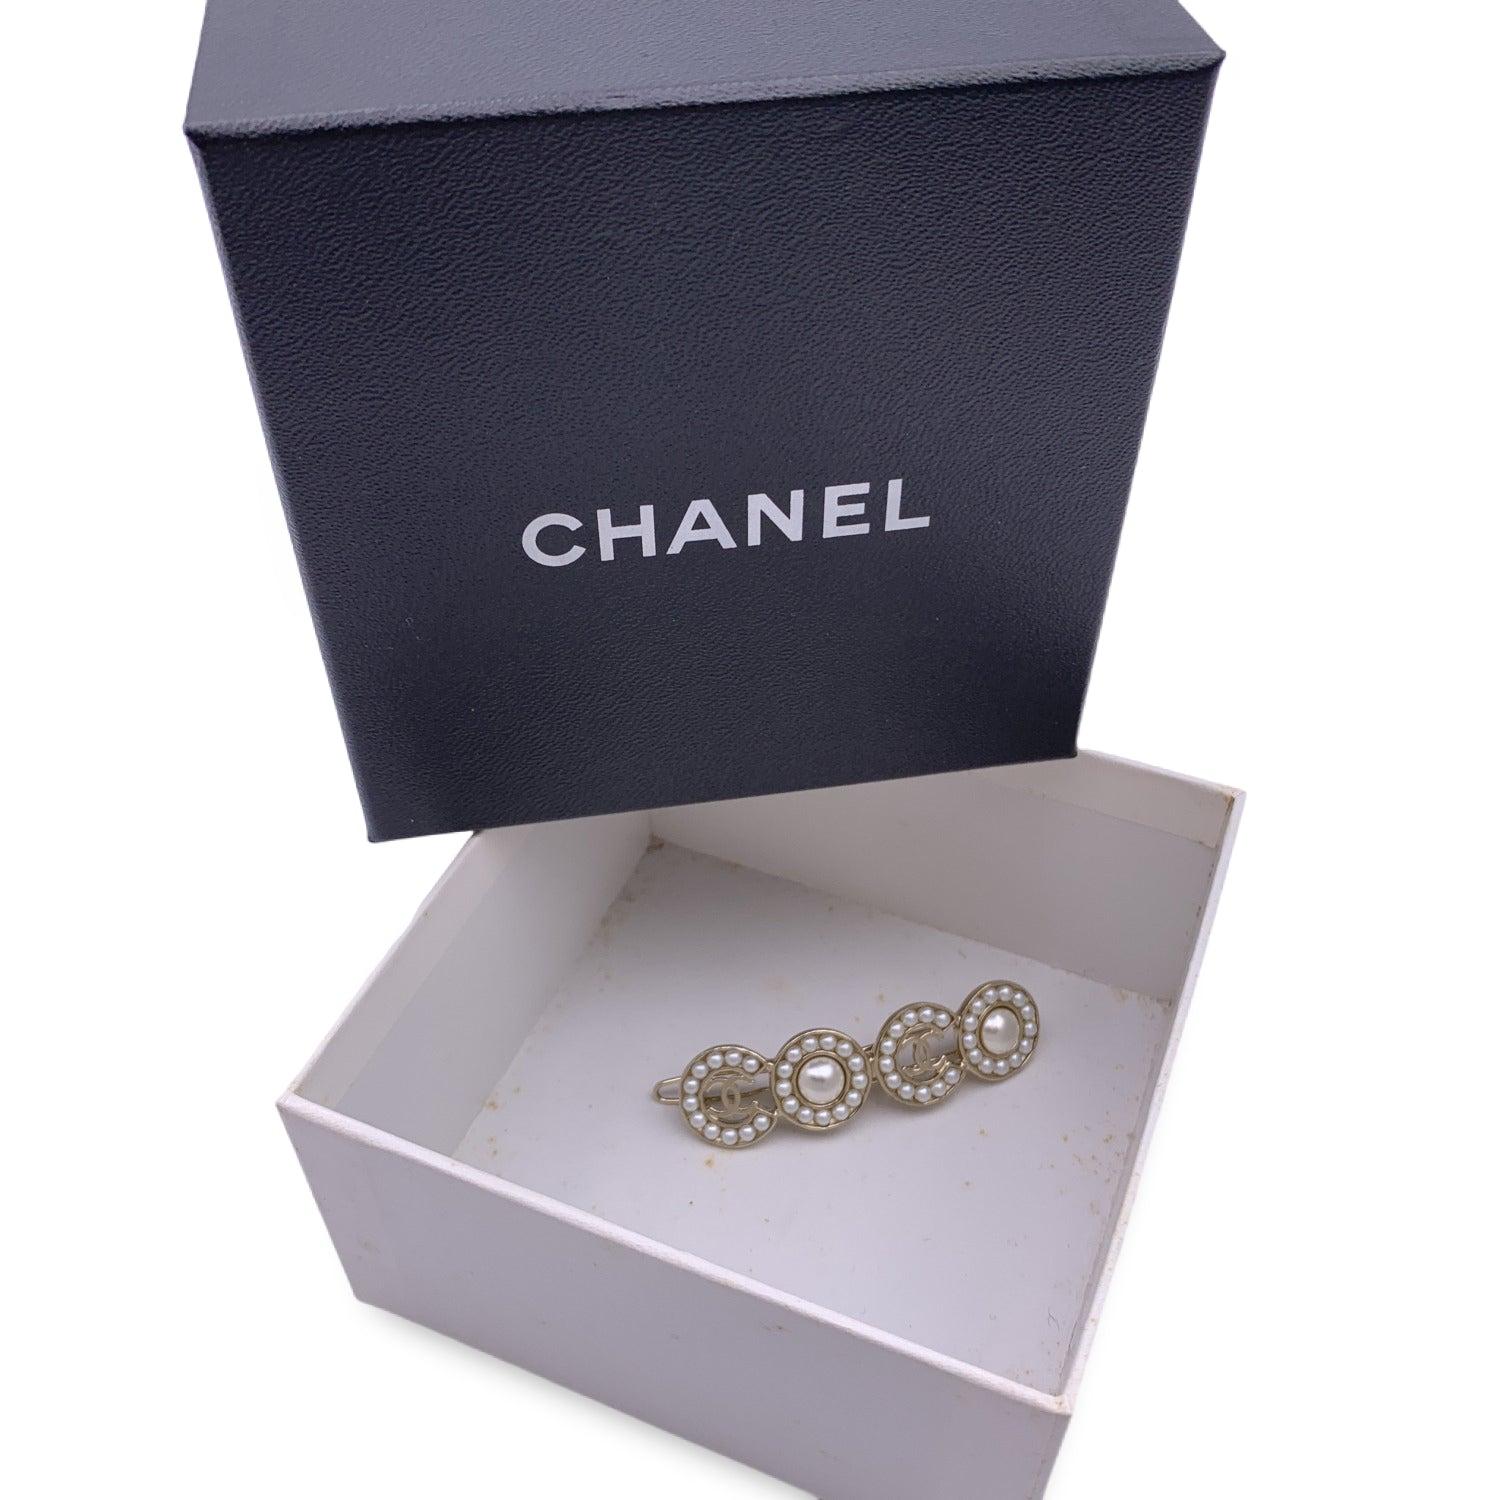 Lovely Chanel 'Coco' barrette hair clip. Light gold metal metal and Faux pearls. CC - Chanel logos. 'Chanel B21 CC P Made in Italy' oval tab on the back. Width:2.5 inches - 6.4 cm Details MATERIAL: Metal COLOR: Gold MODEL: - GENDER: Women COUNTRY OF